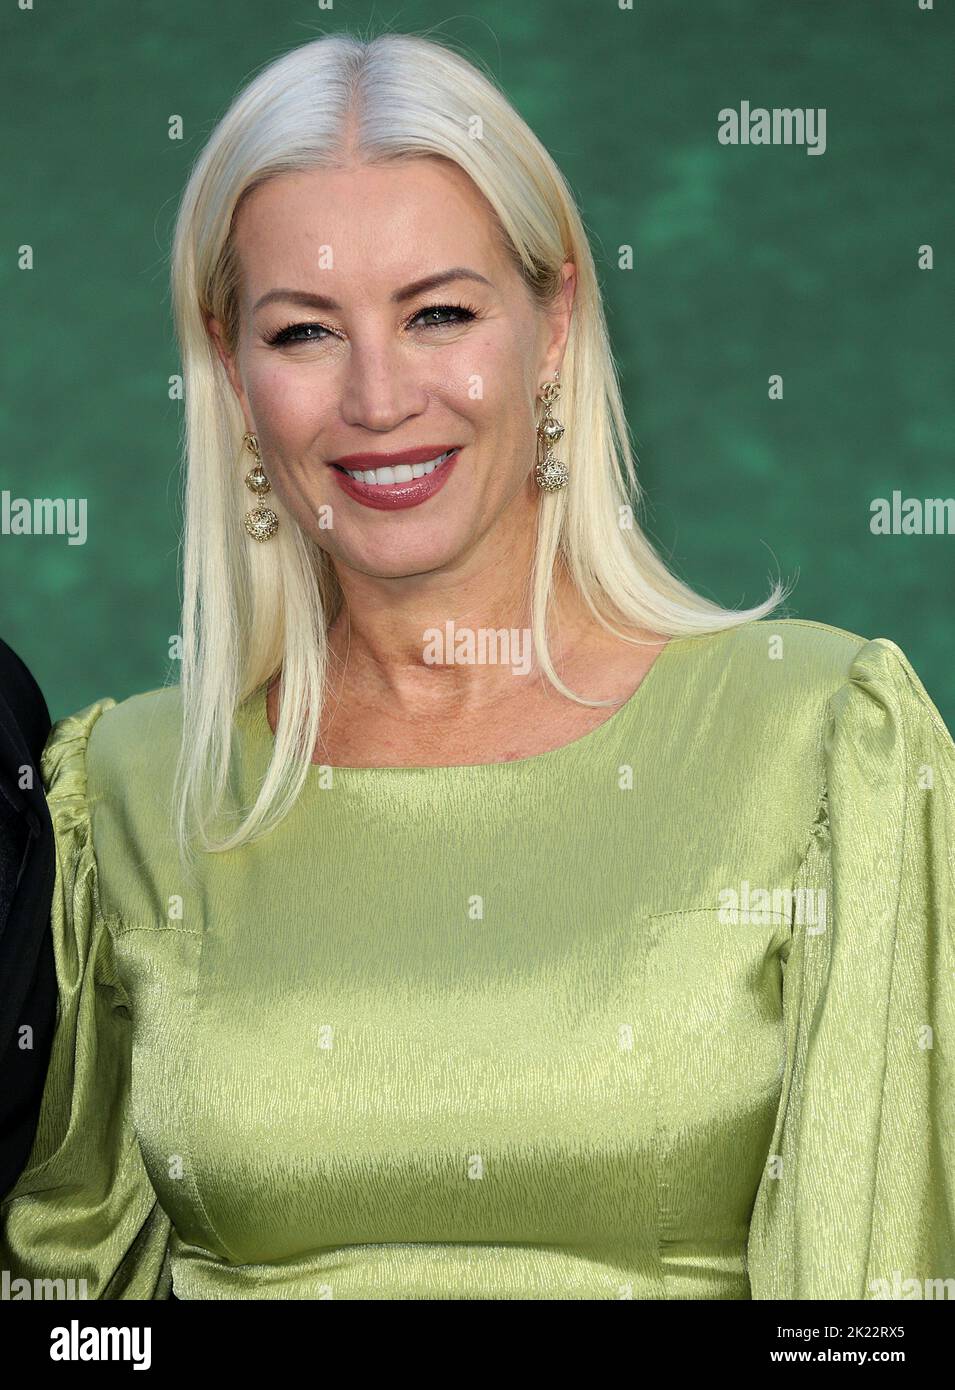 Sep 21, 2022 - London, England, UK - Denise Van Outen attending Amsterdam European premiere, Odeon Luxe, Leicester Square Stock Photo